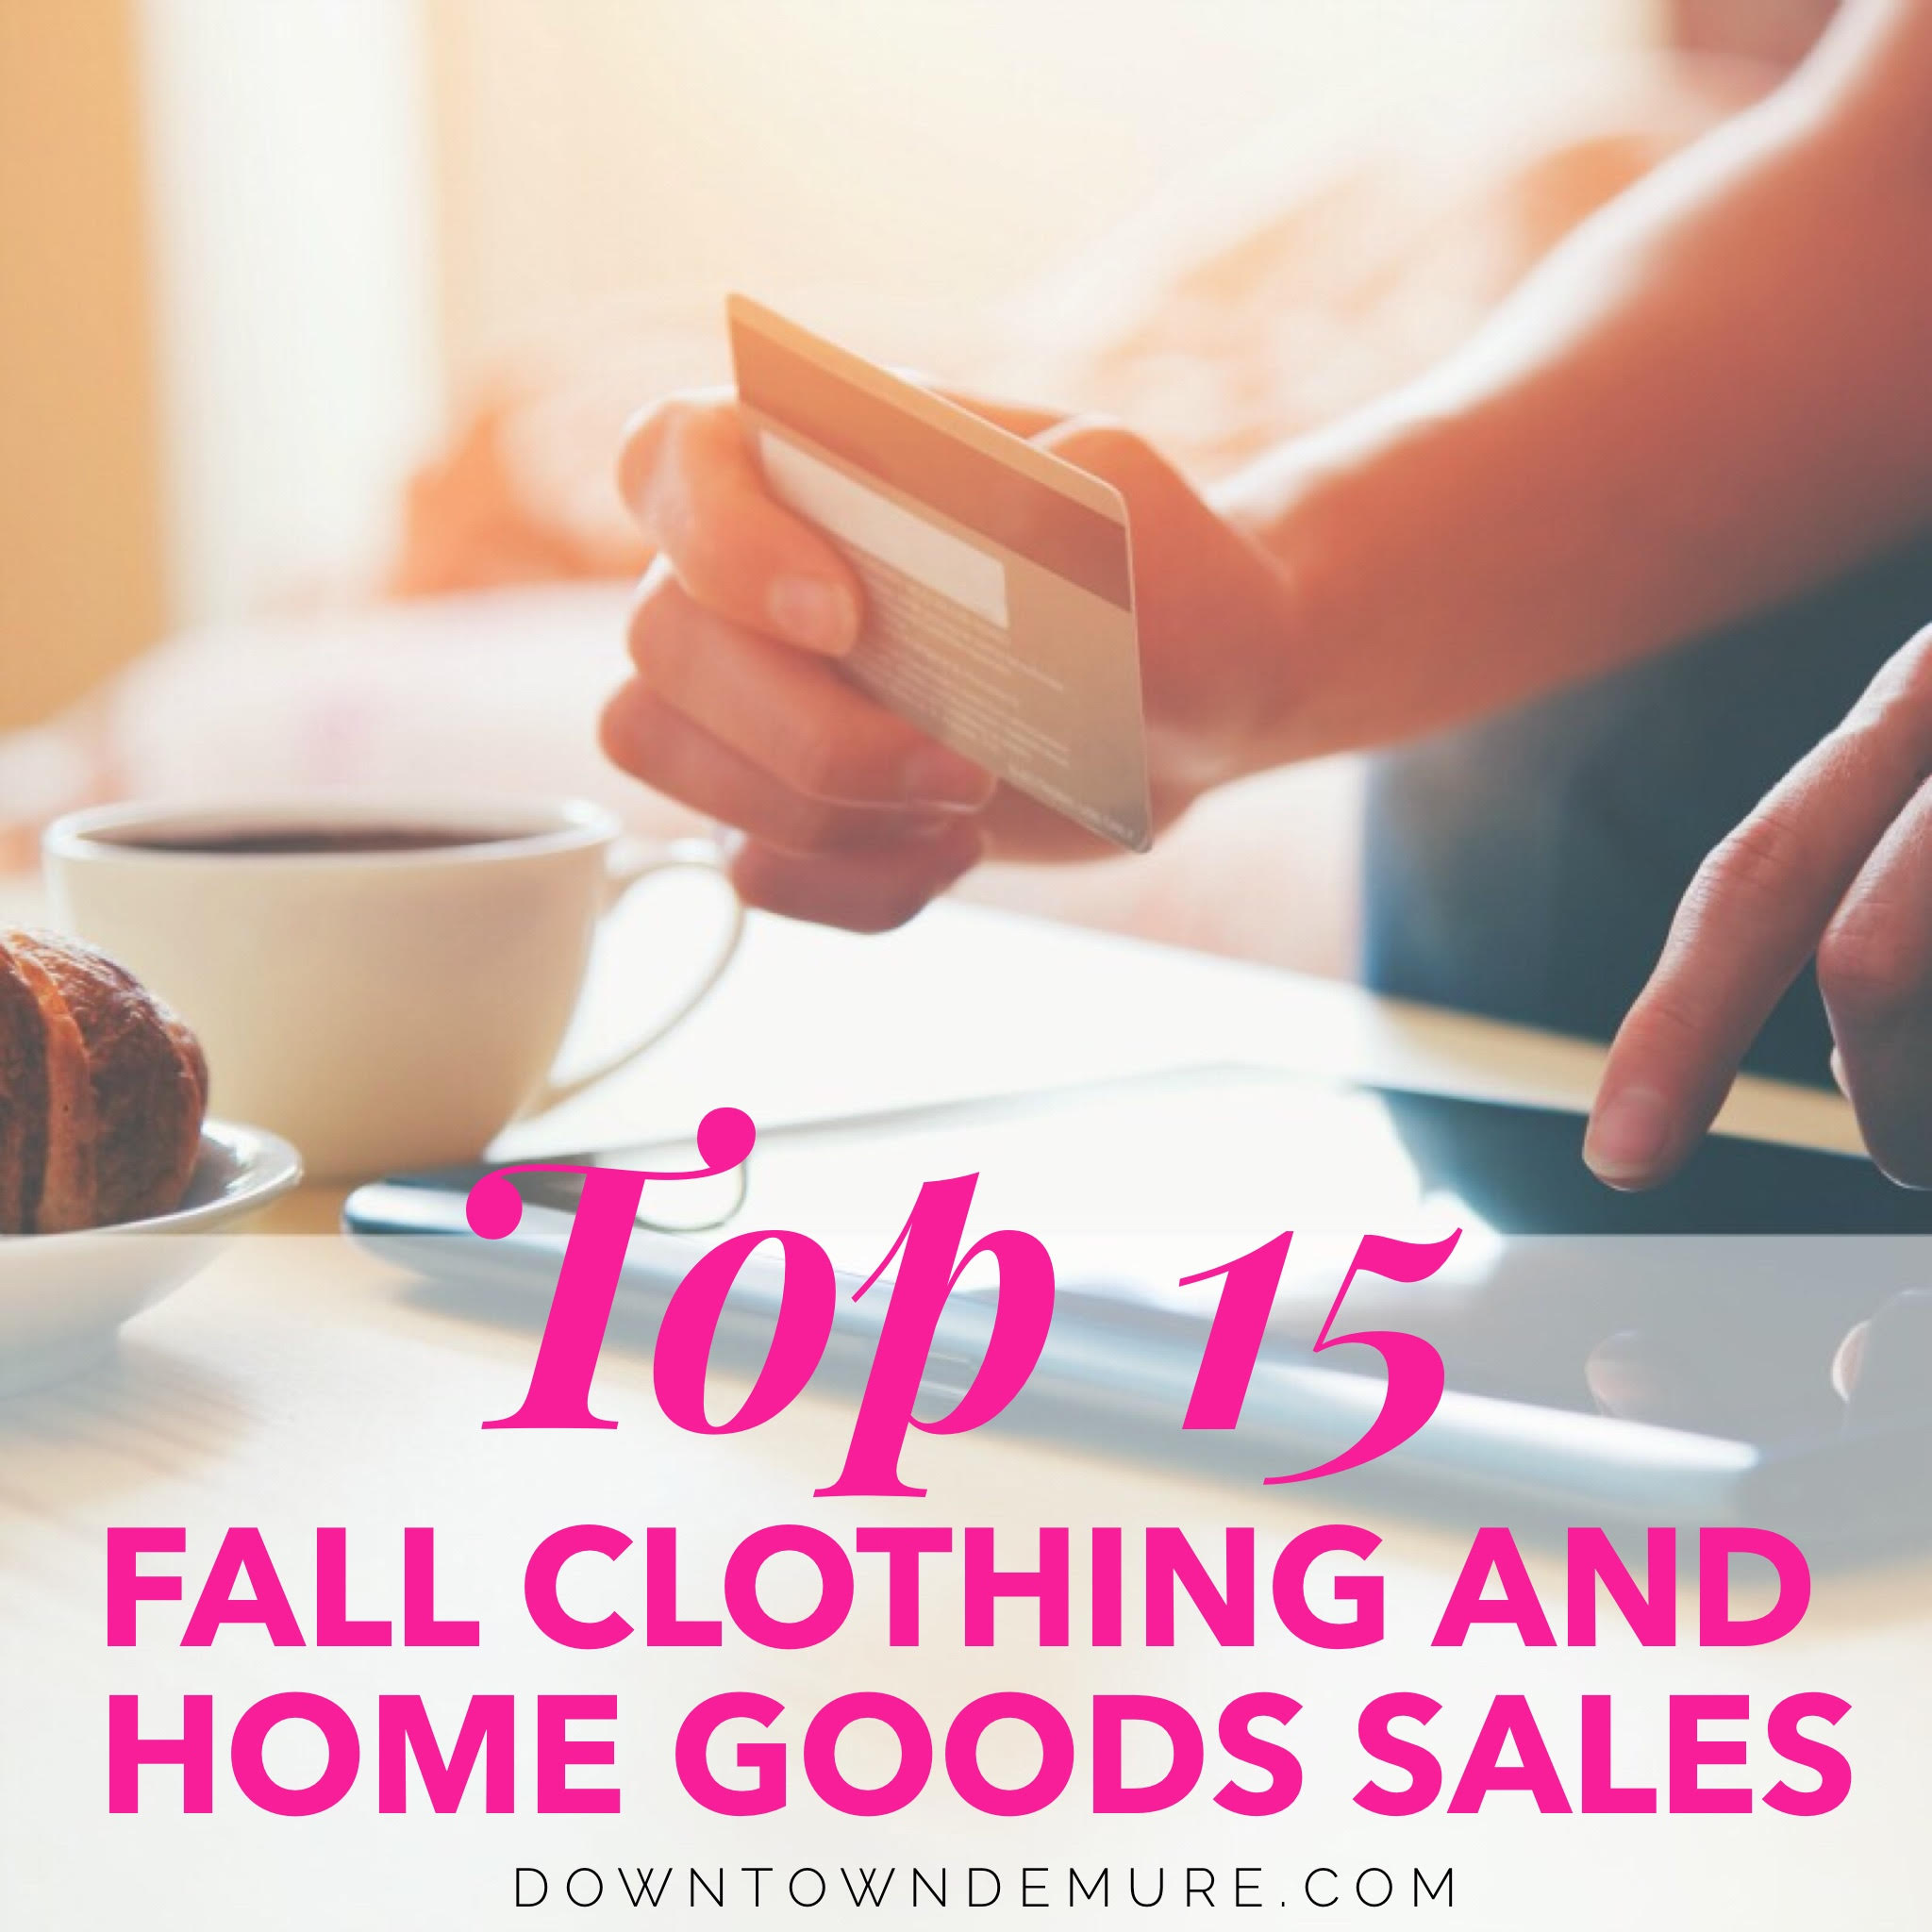 Top 15 Fall Clothing and Home Goods Sales via Groupon Coupons - Downtown Demure